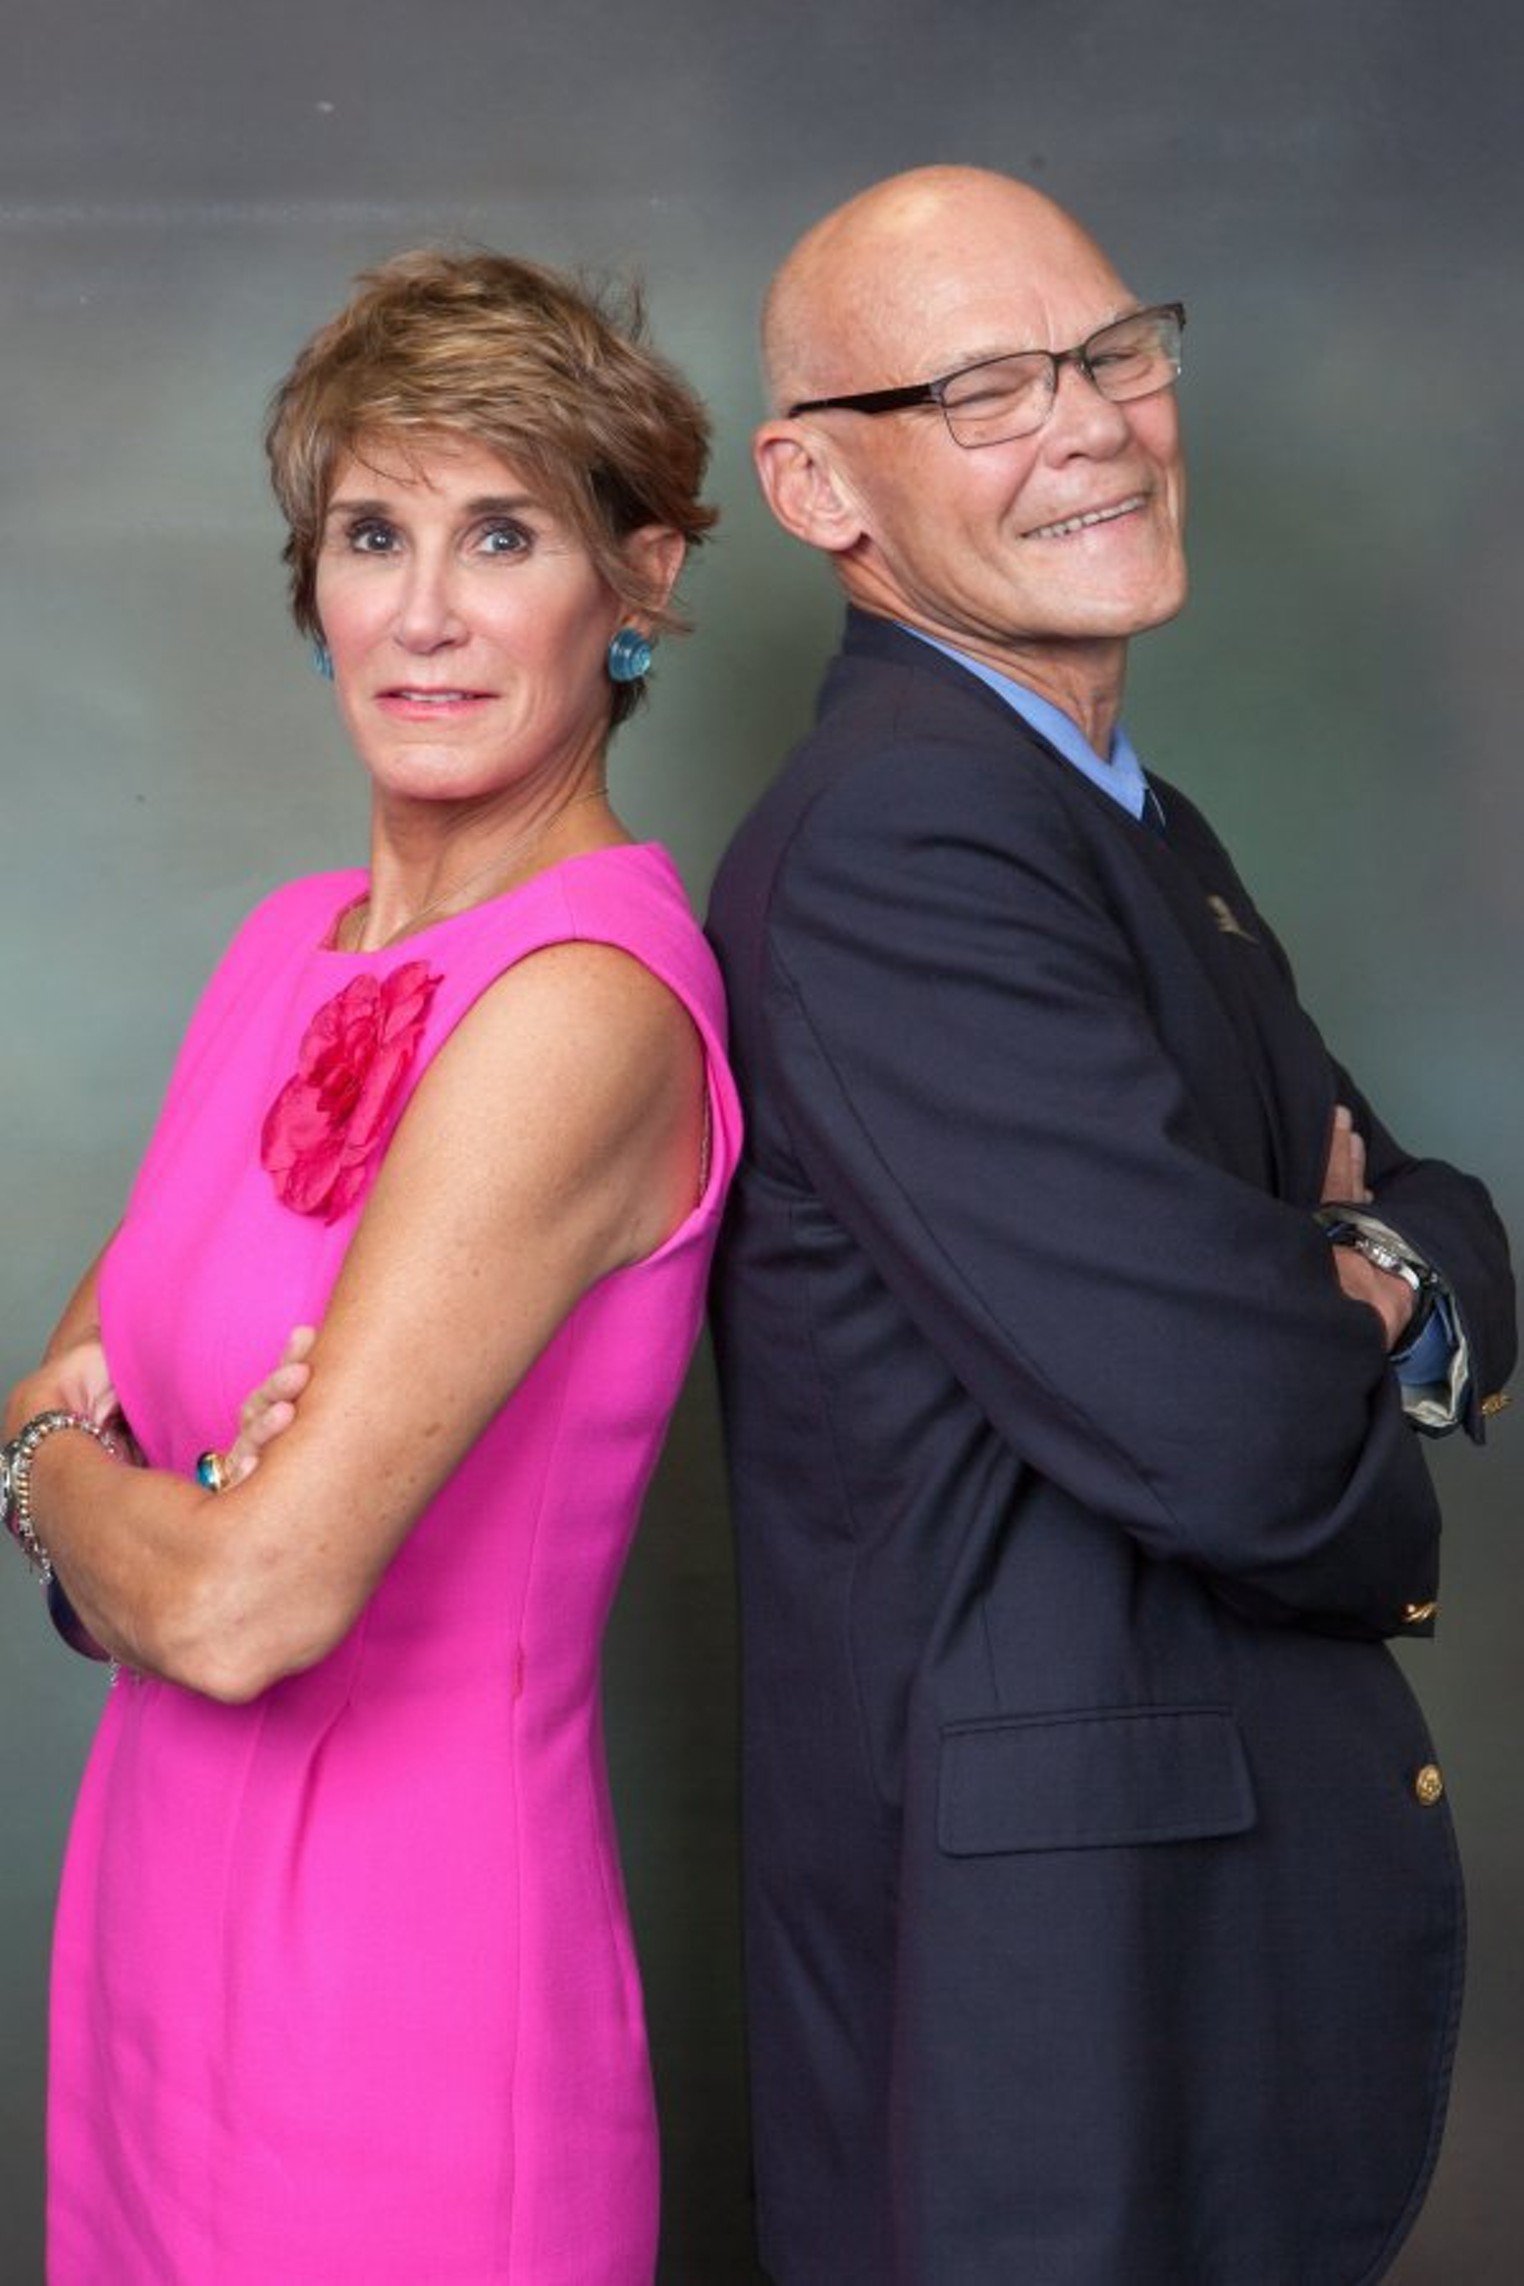 Who Is James Carville's Wife? 29 Years Of Unexpected Marriage!